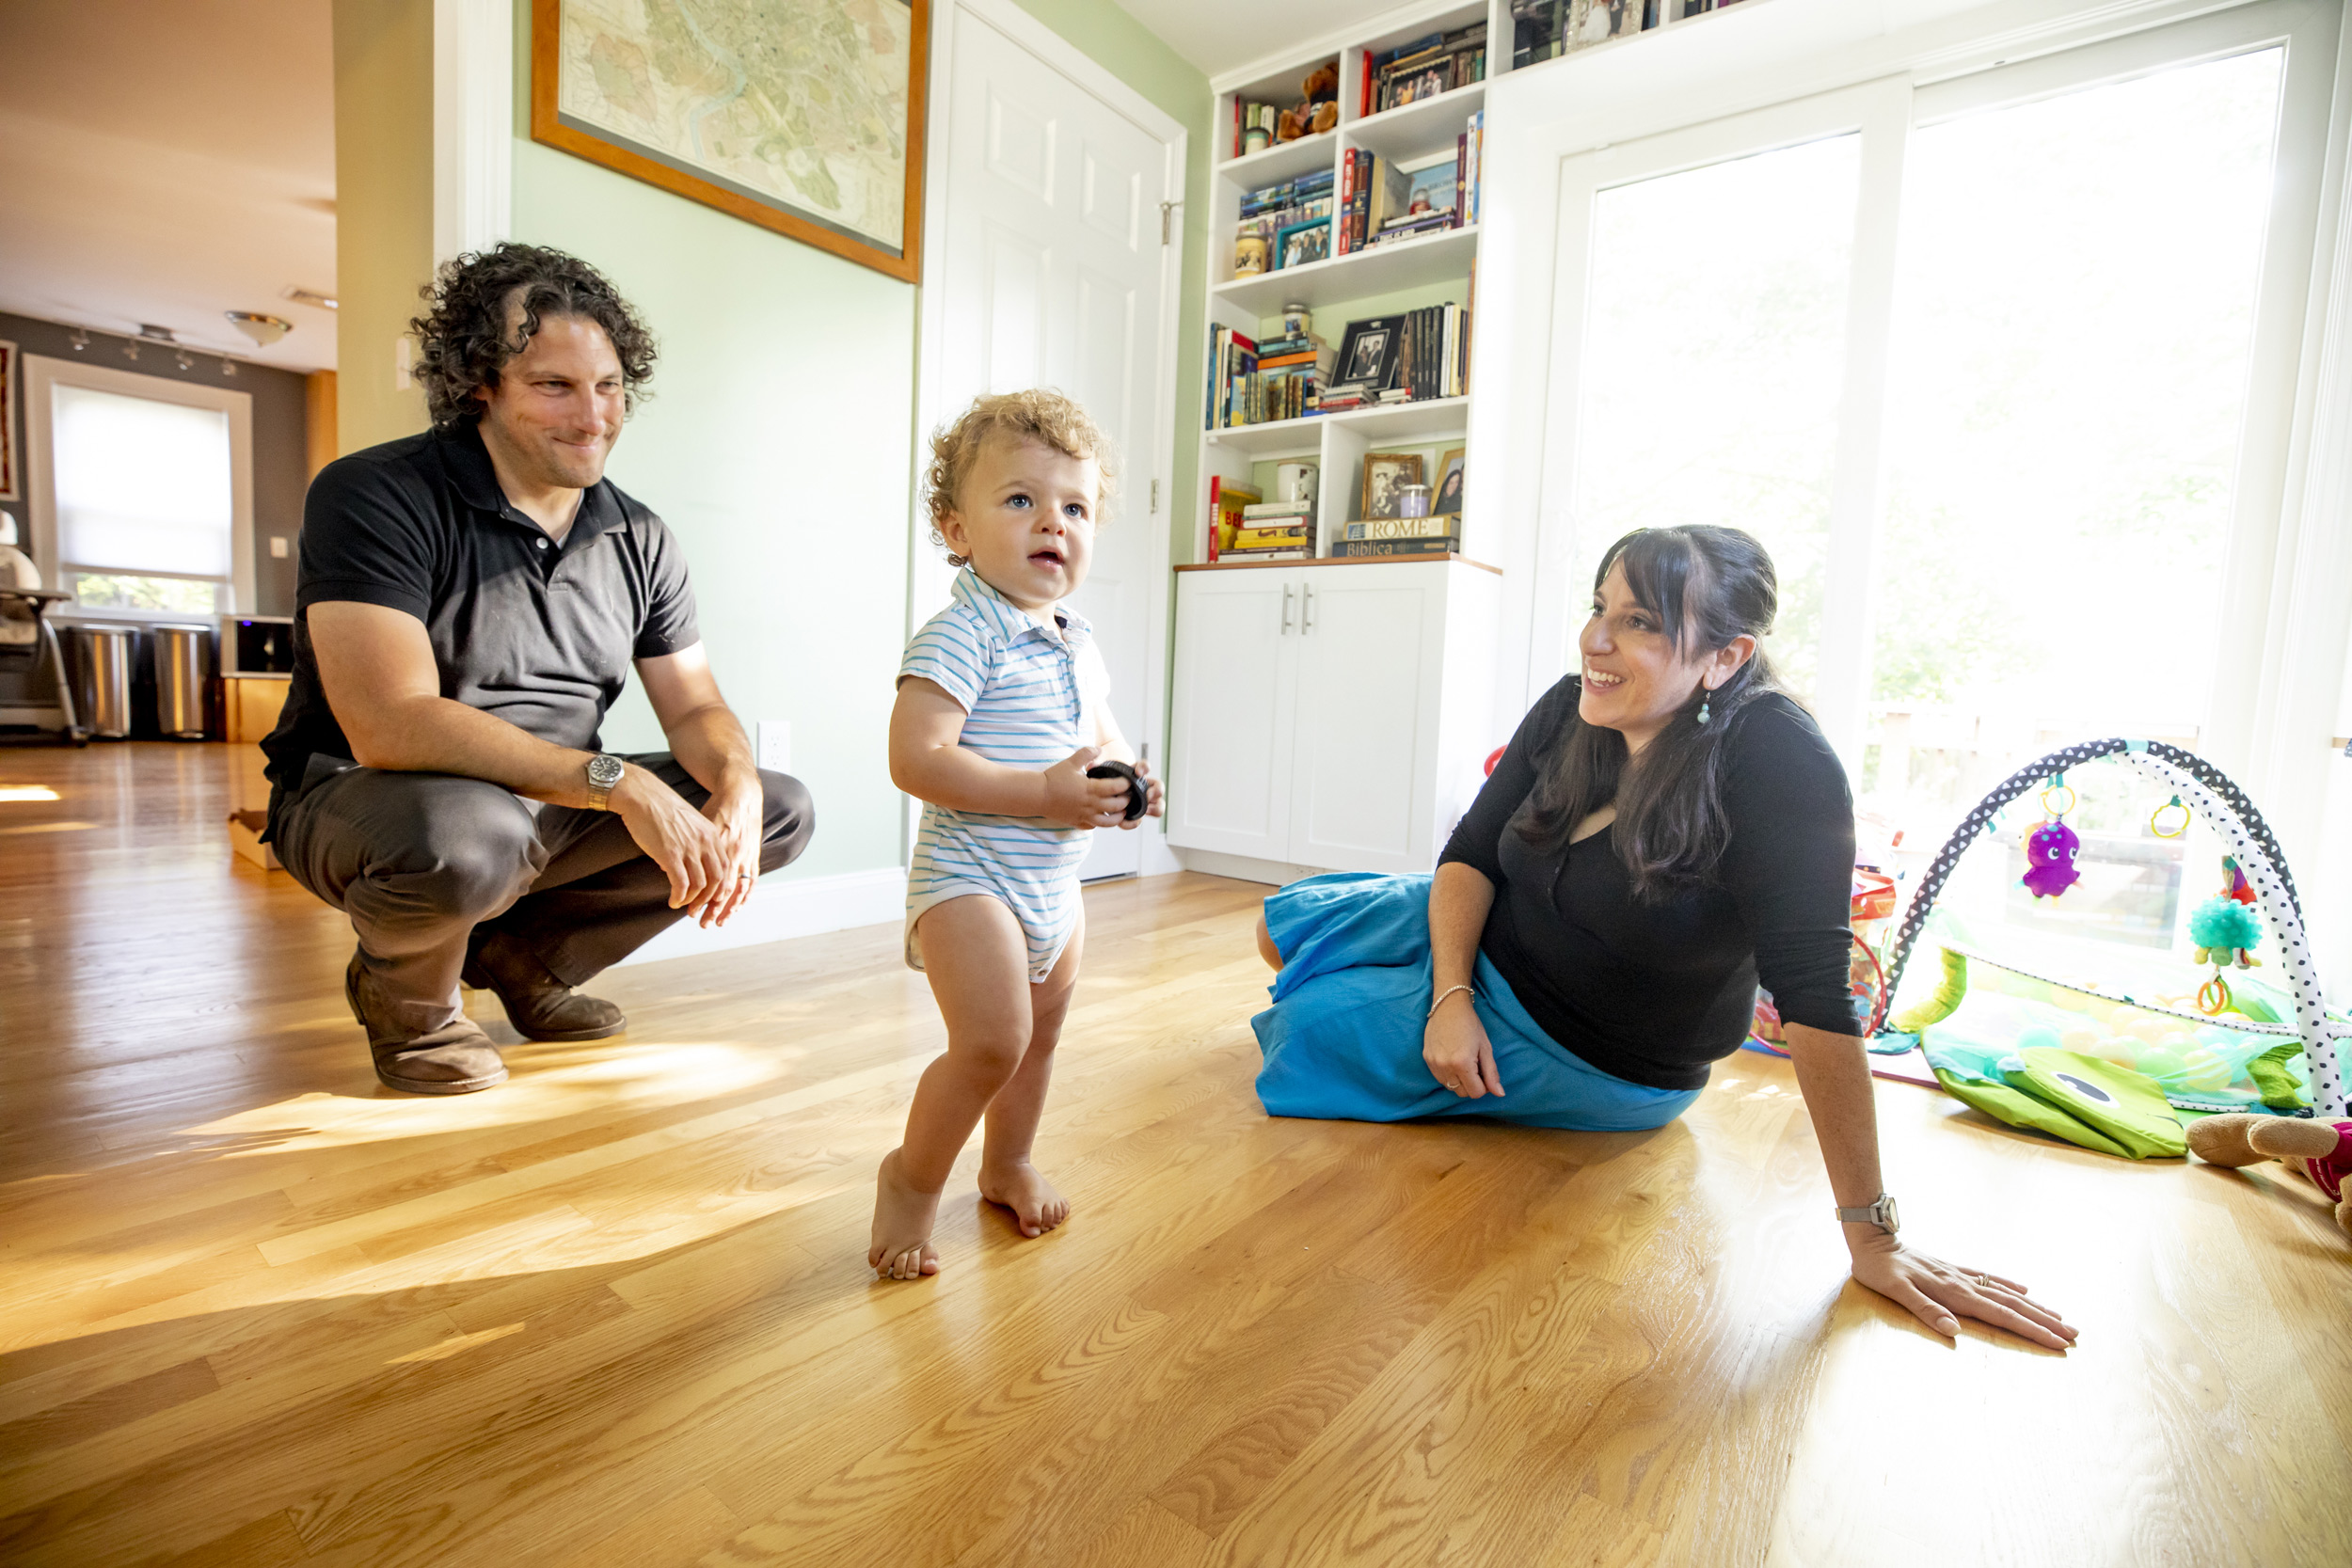 Jessica Pesce is pictured with her husband Dan Ullucci and son Antonio Ullucci in their Arlington home.